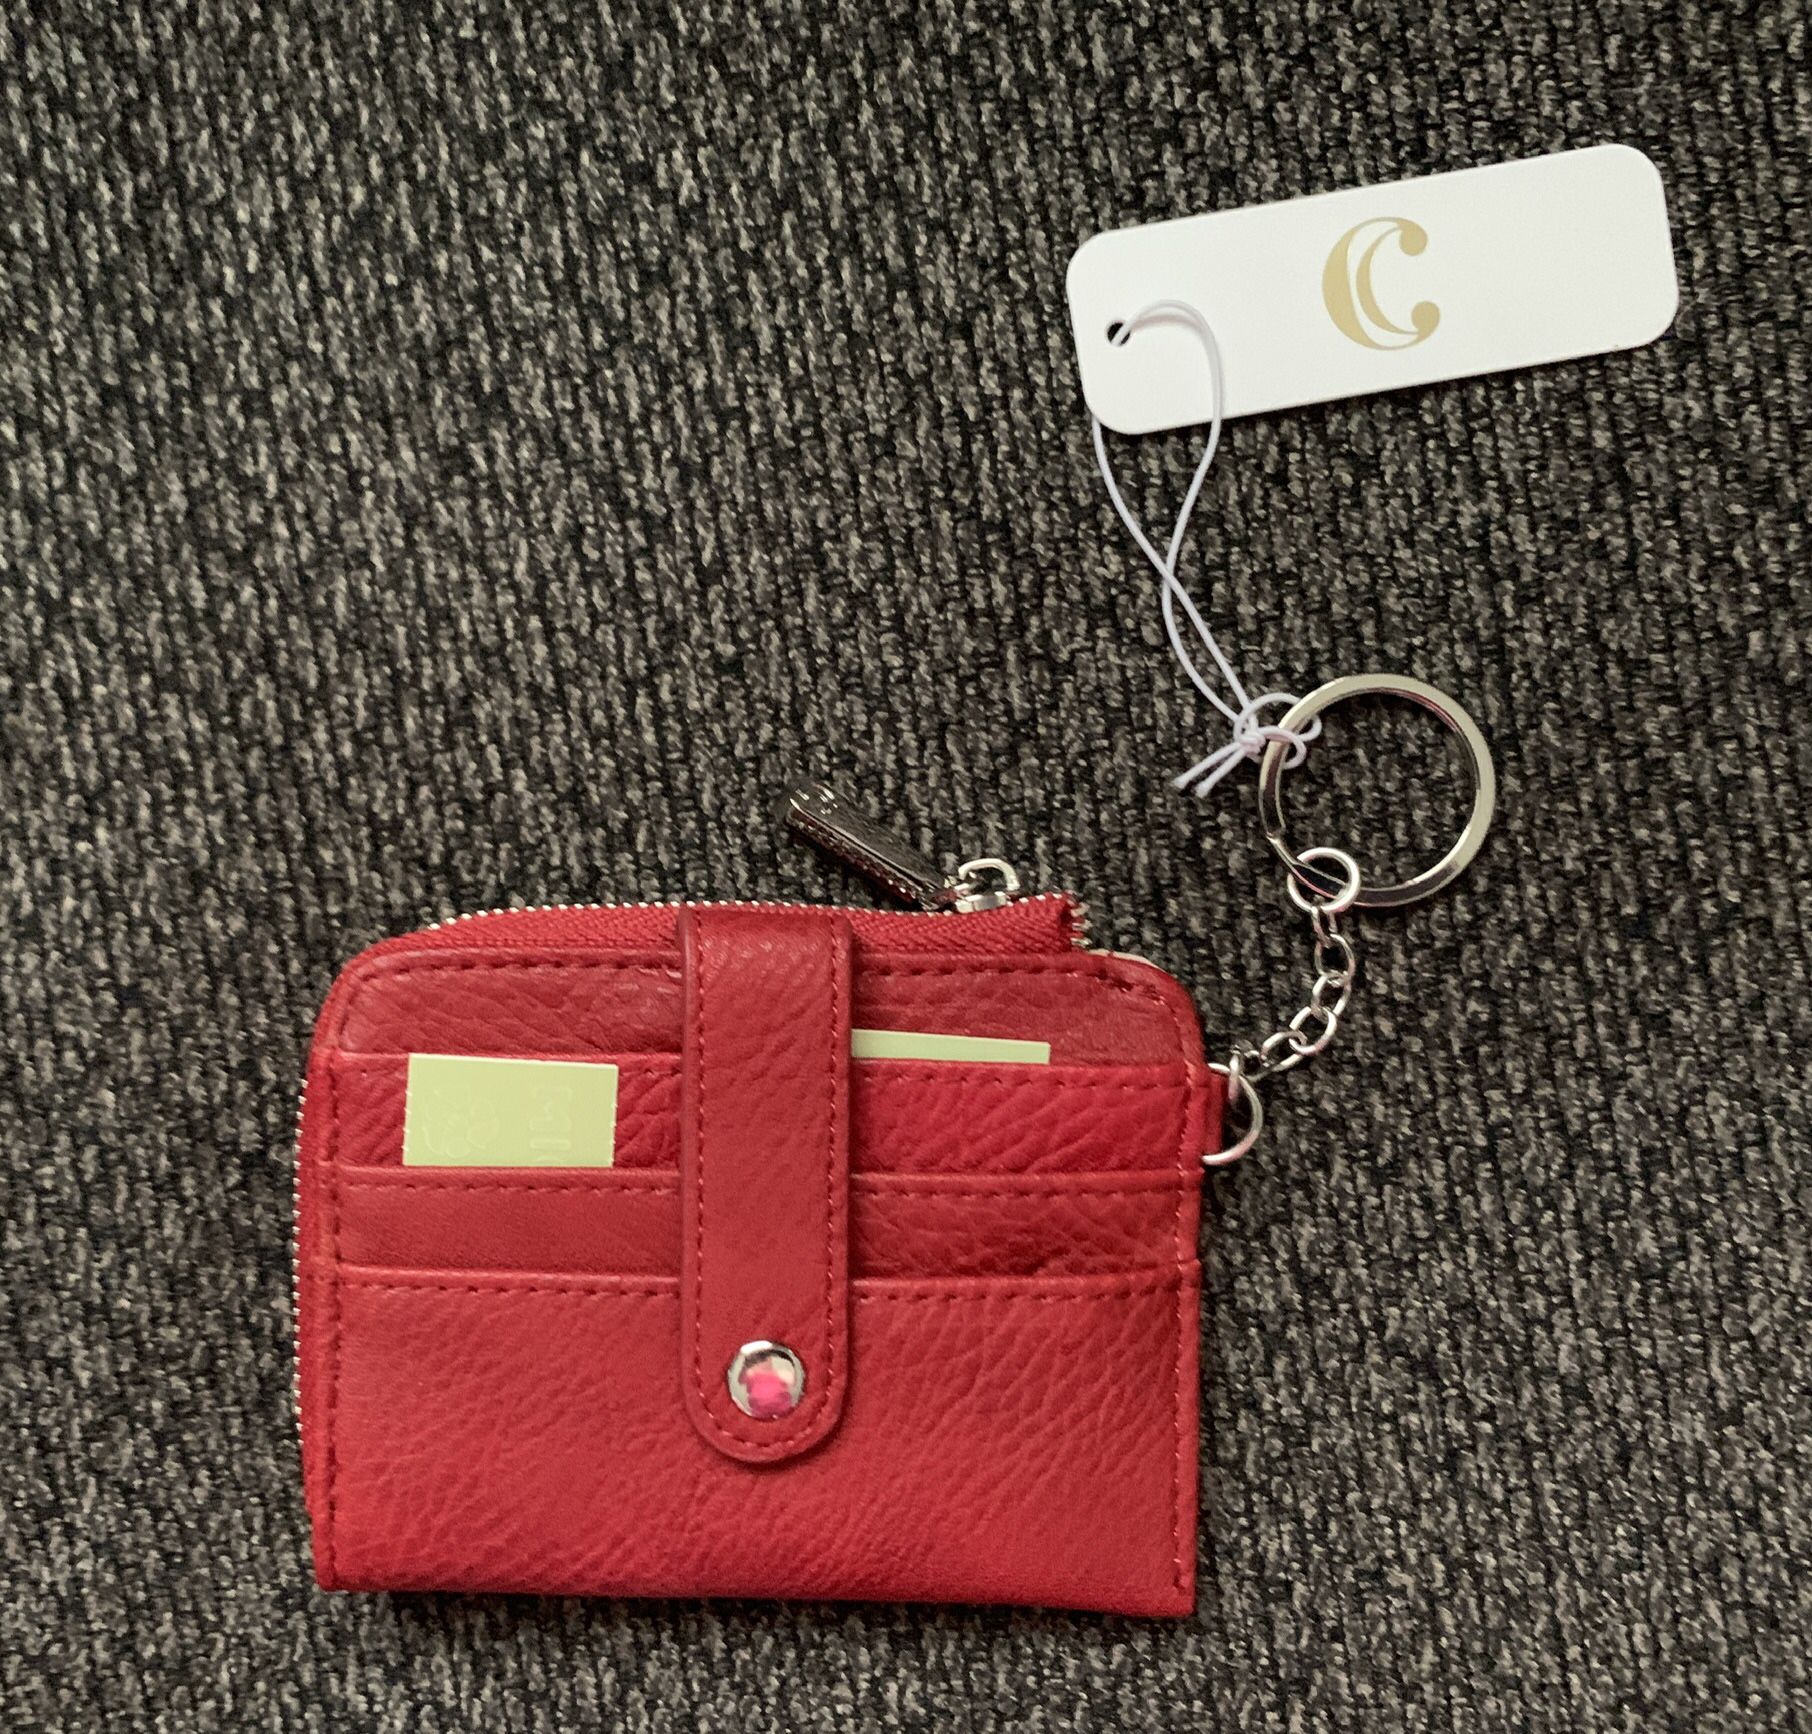 Charming Charlie’s wallet keychain